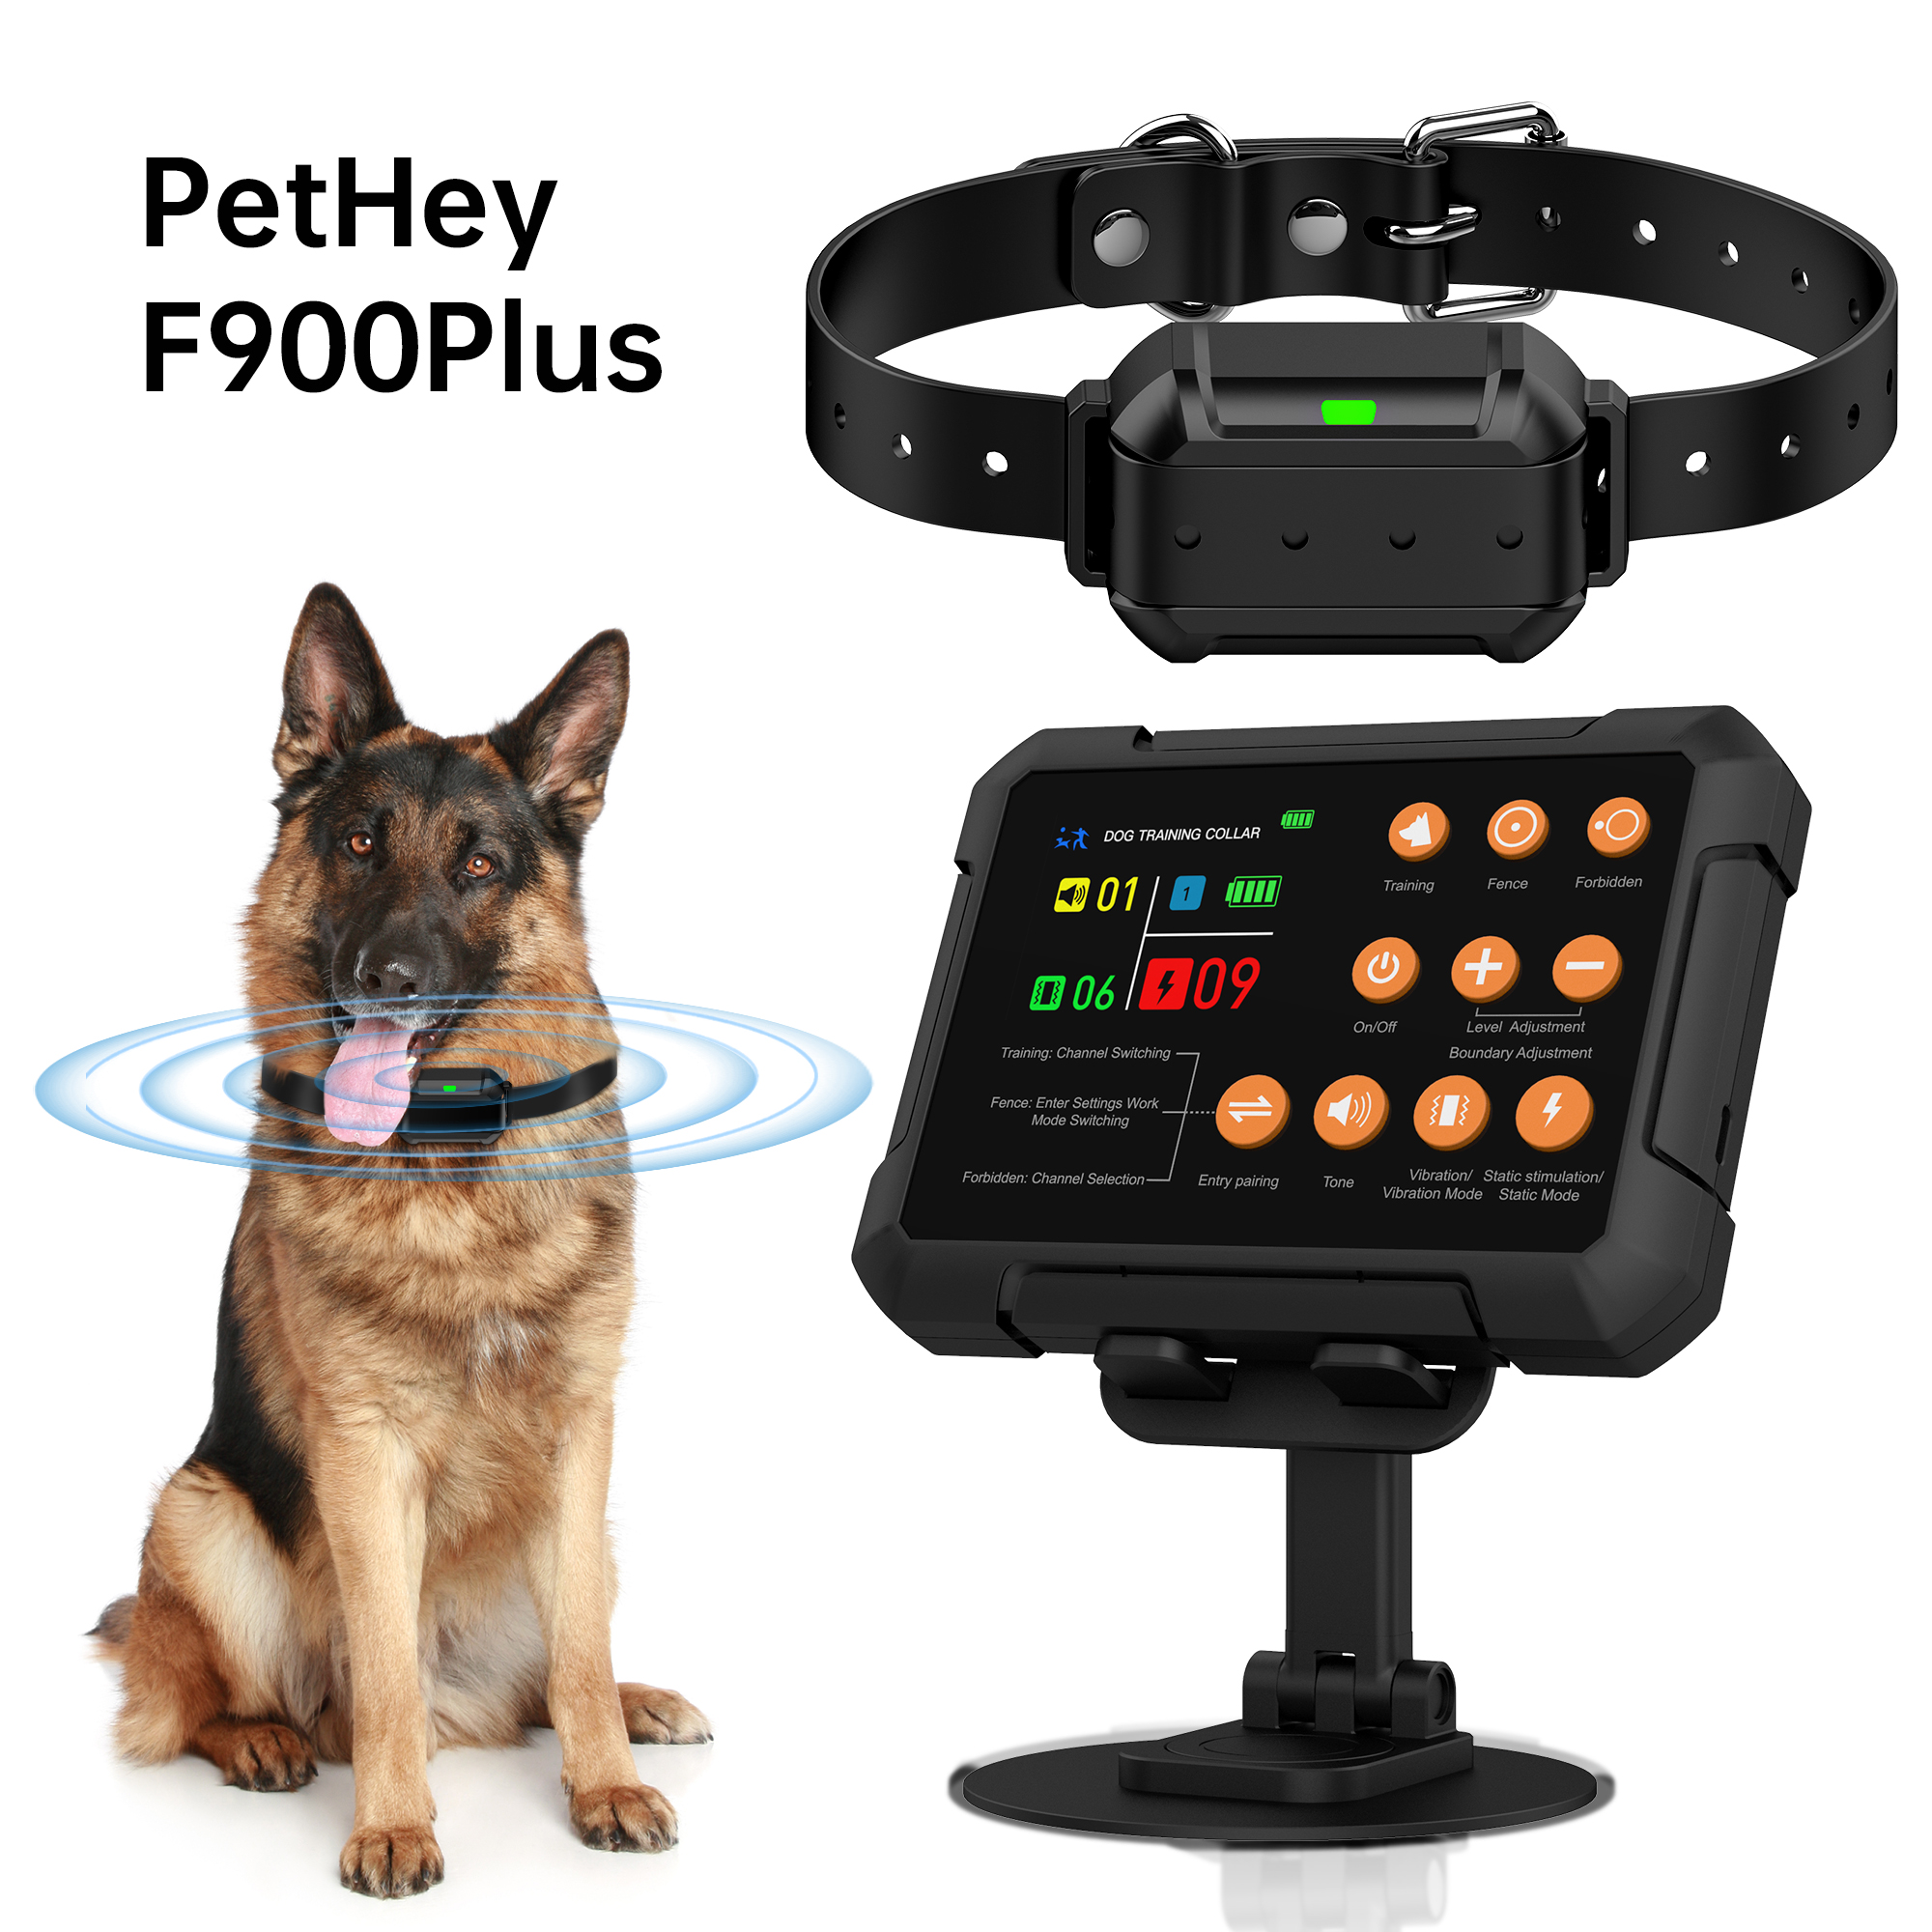 Ensuring Pet Safety and Freedom: PetHey Launches Advanced Electric Fence for Dogs with 3-in-1 System and Real-Time Monitoring